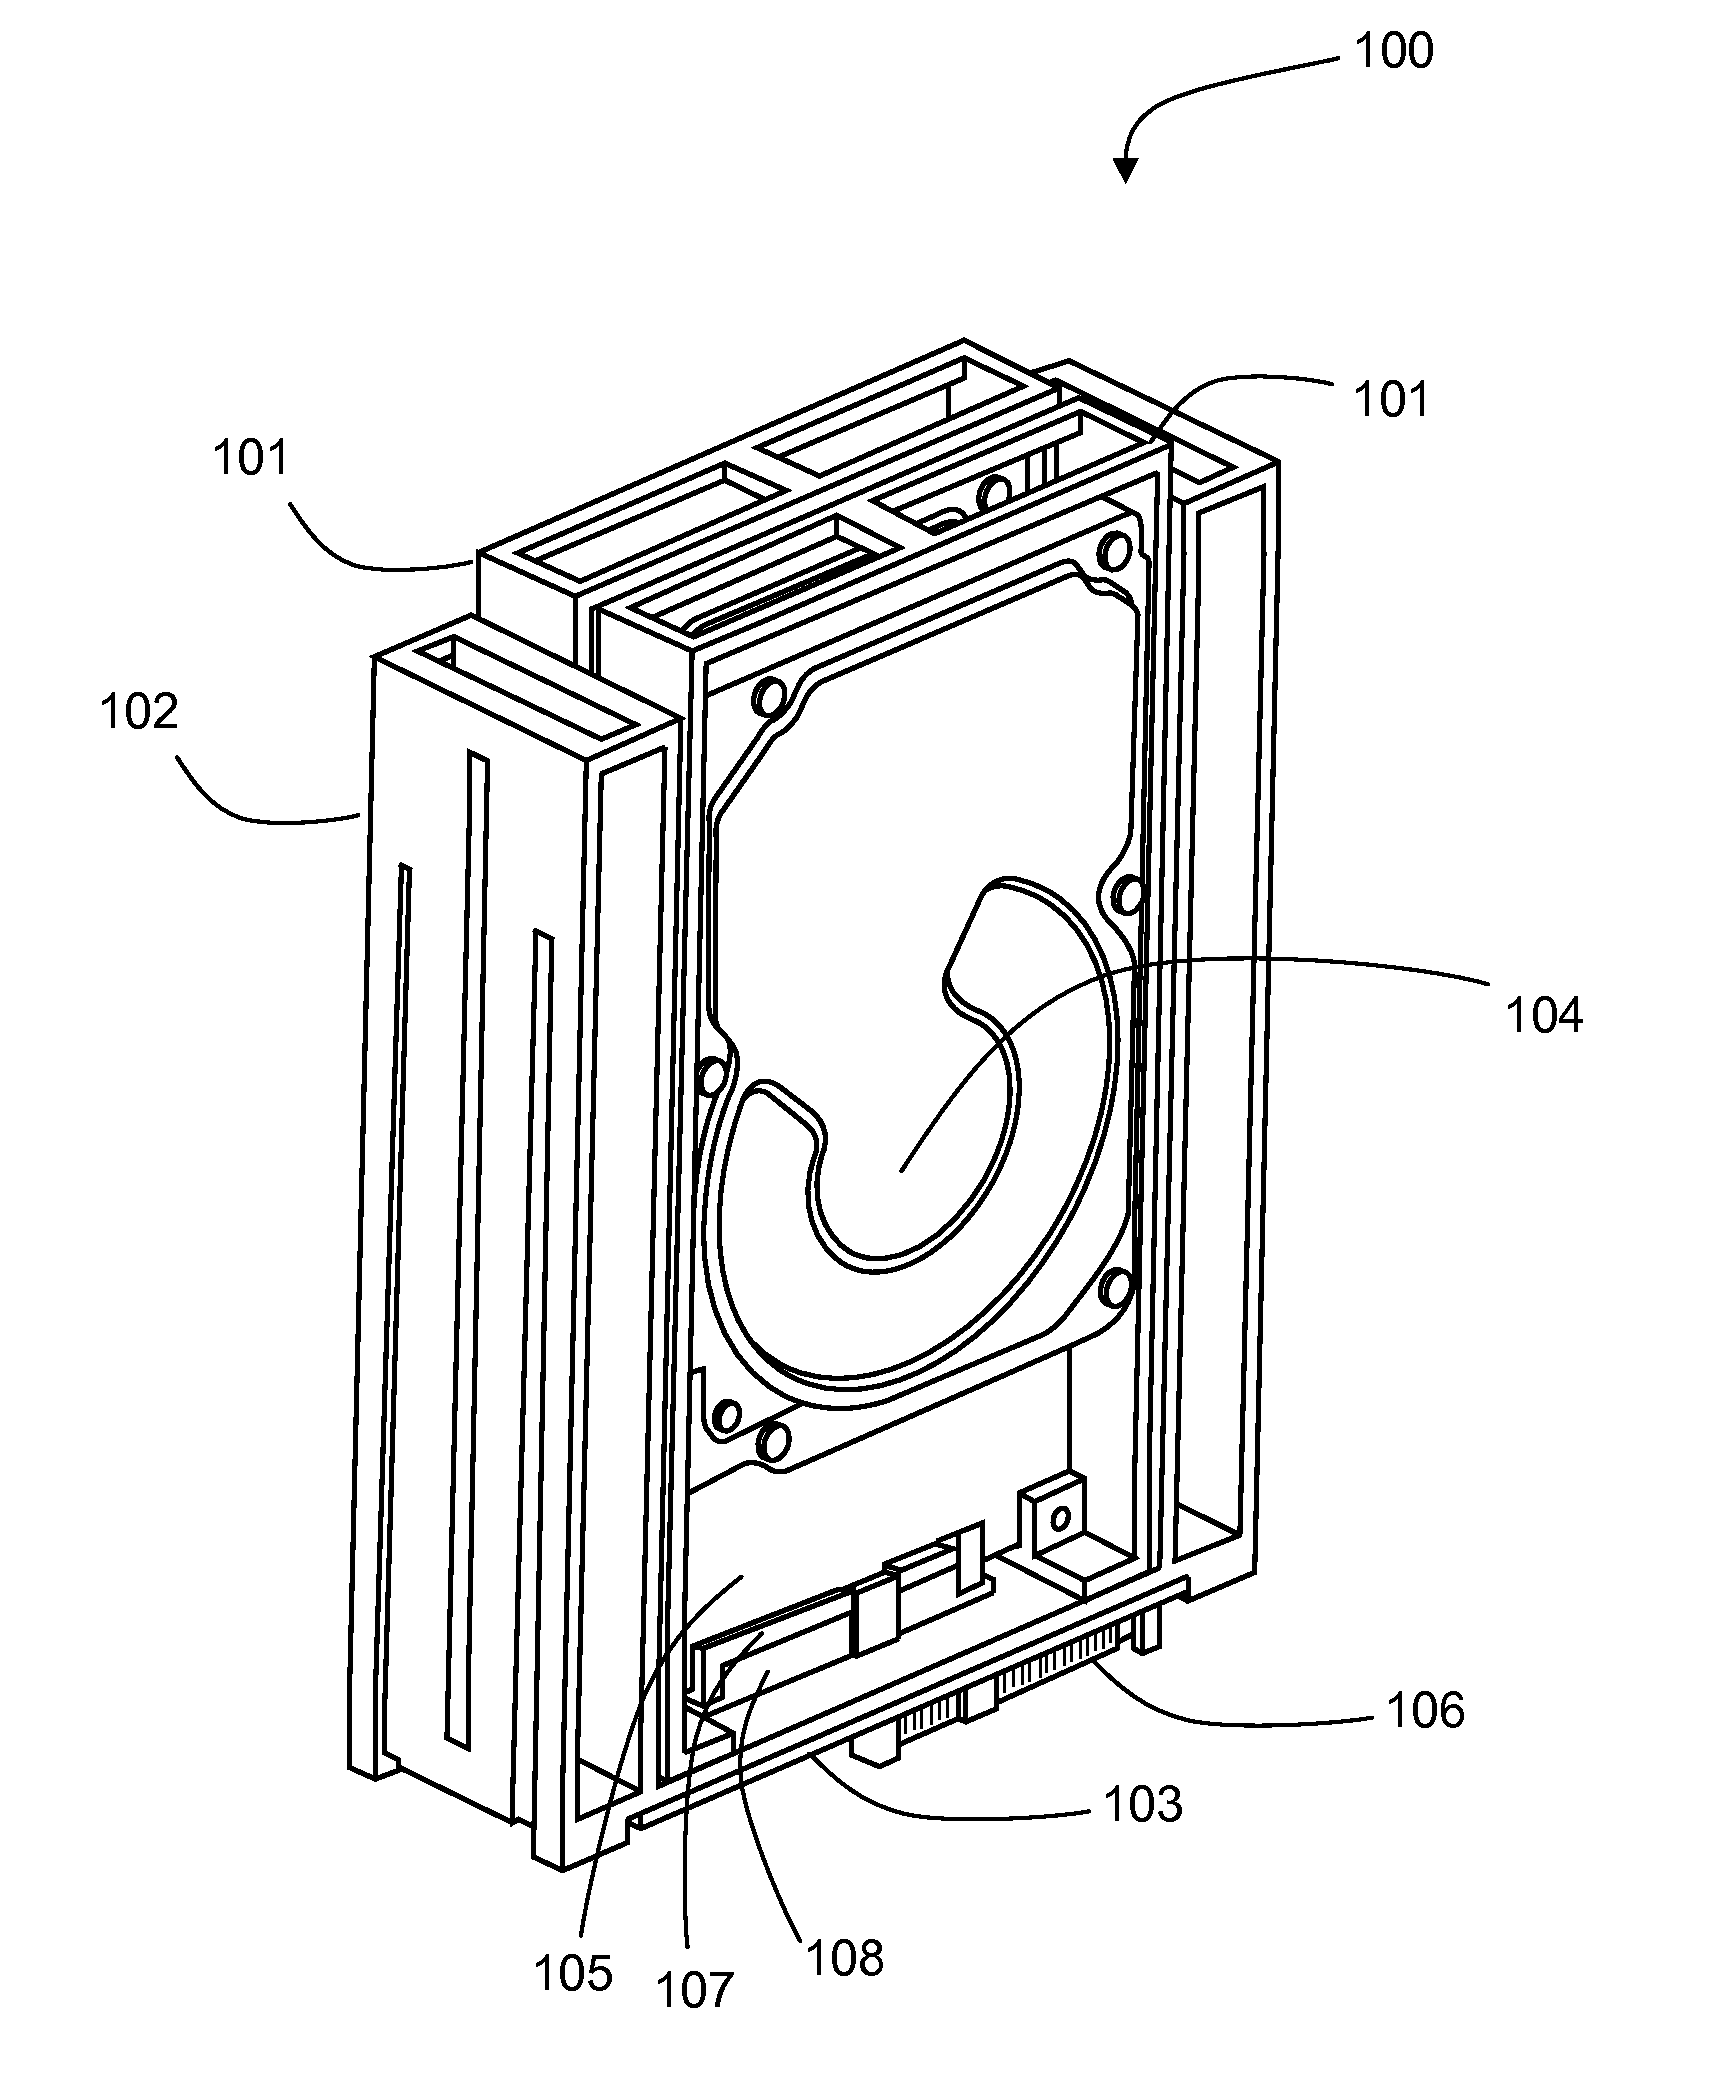 Incorporation of multiple, 2.5-inch or smaller hard disk drives into a single drive carrier with a single midplane or baseboard connector